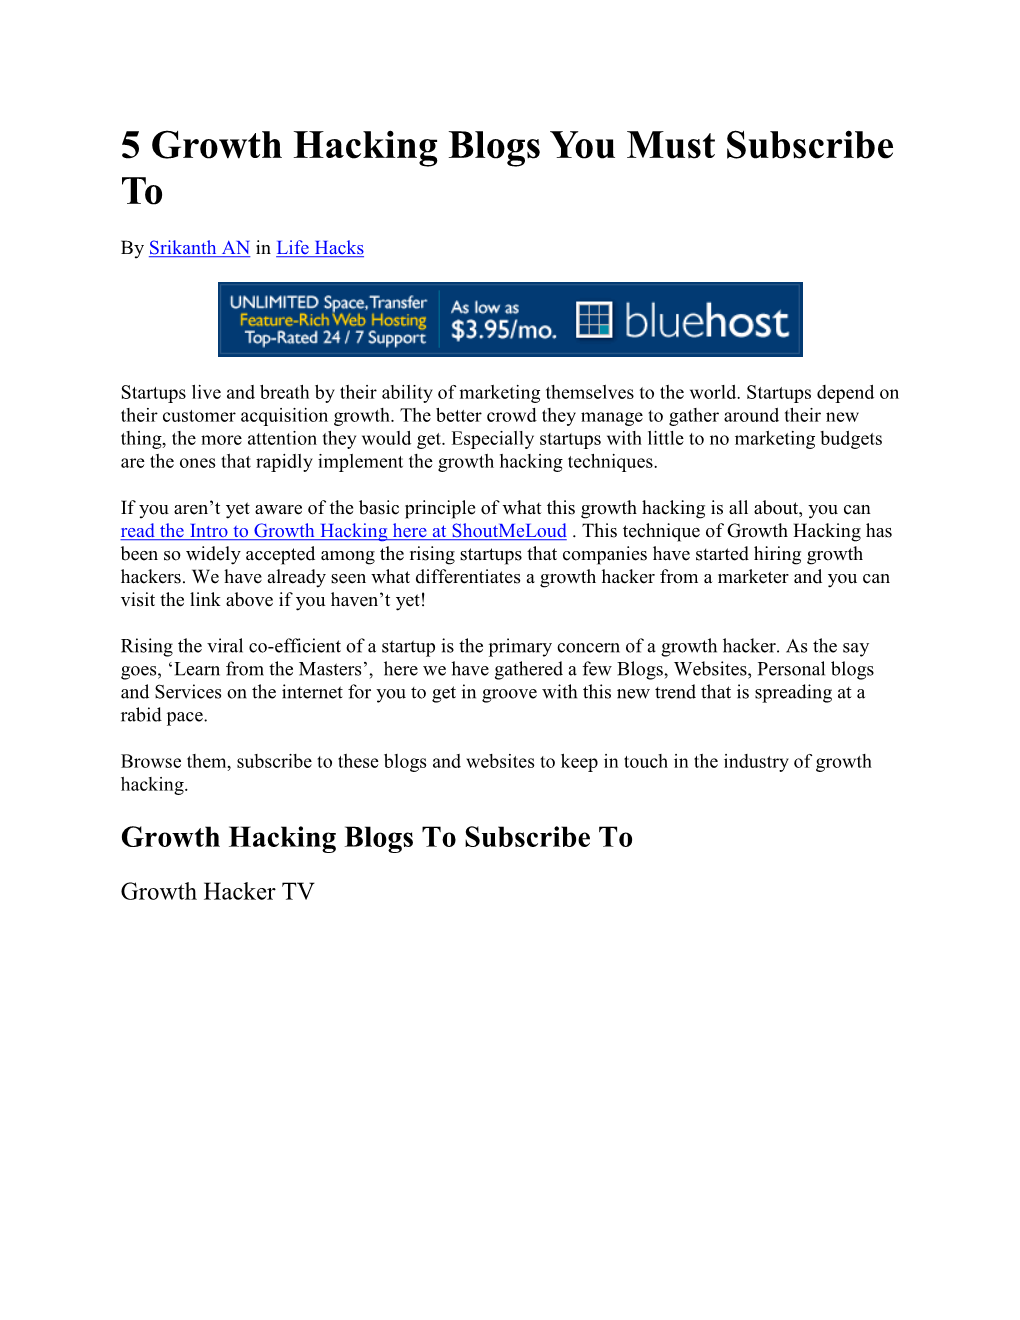 5 Growth Hacking Blogs You Must Subscribe To